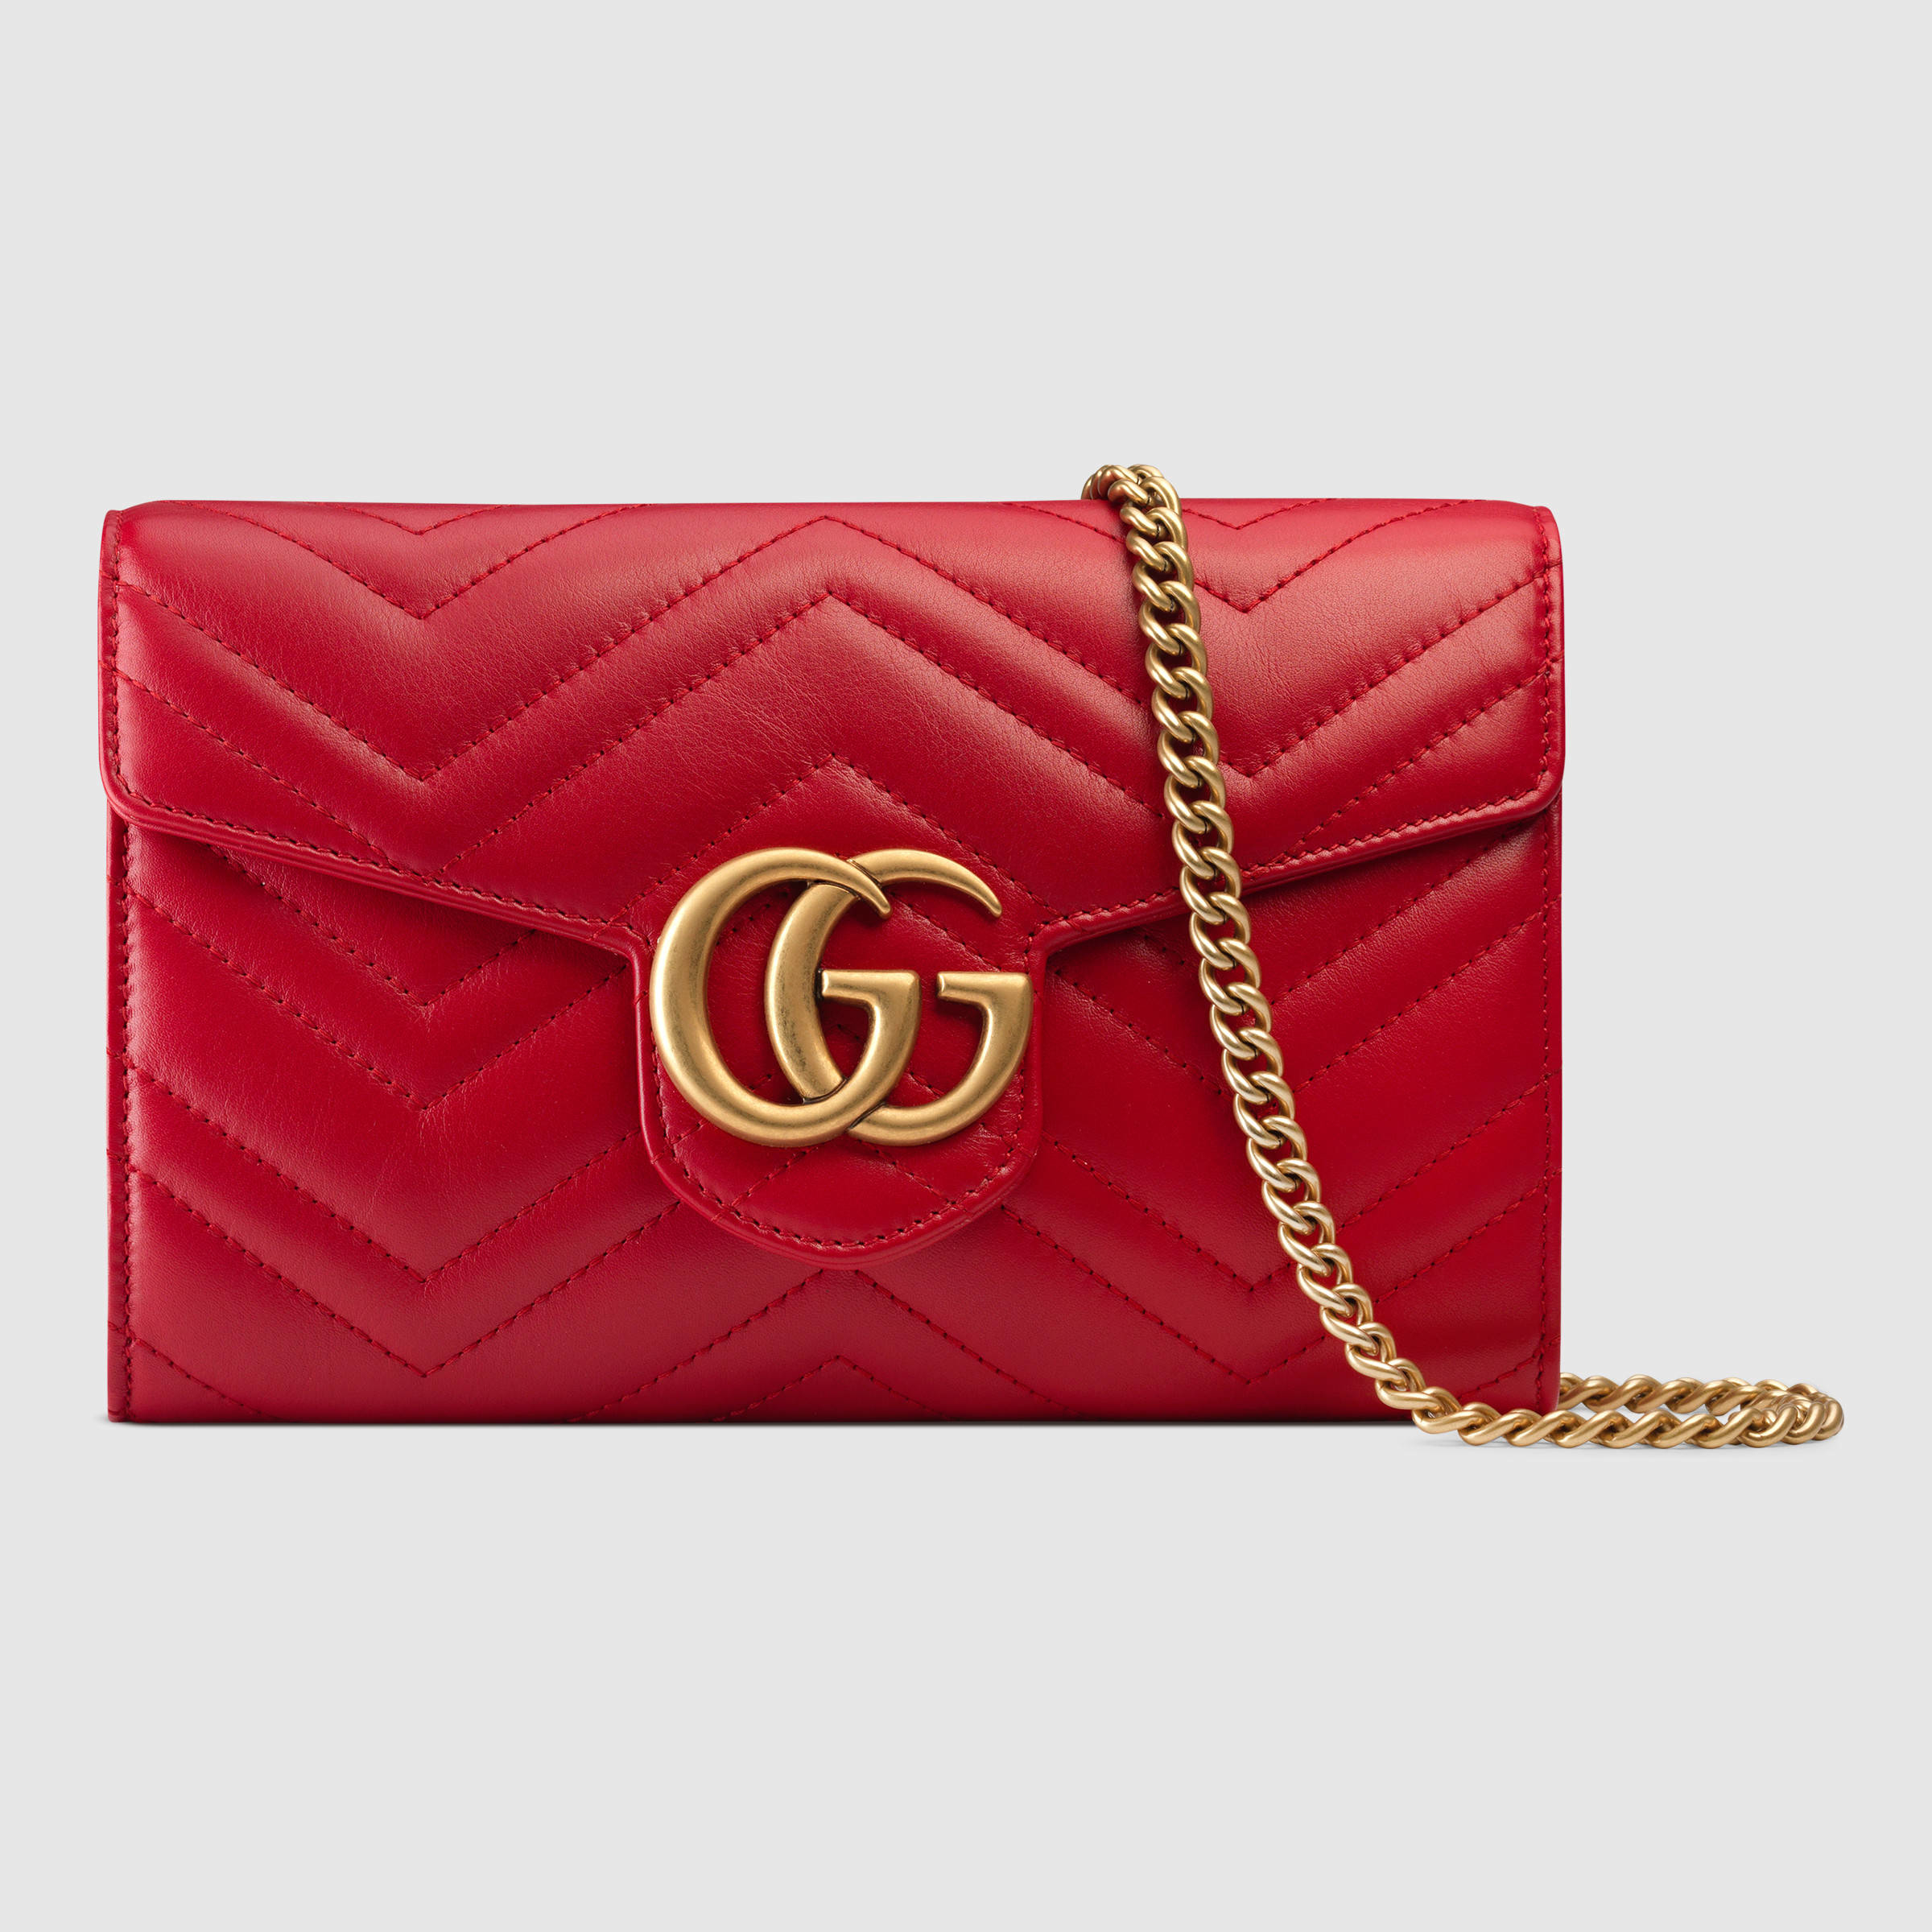 Gucci GG Marmont Matelassé Leather Mini Shoulder Bag in Red | Lyst